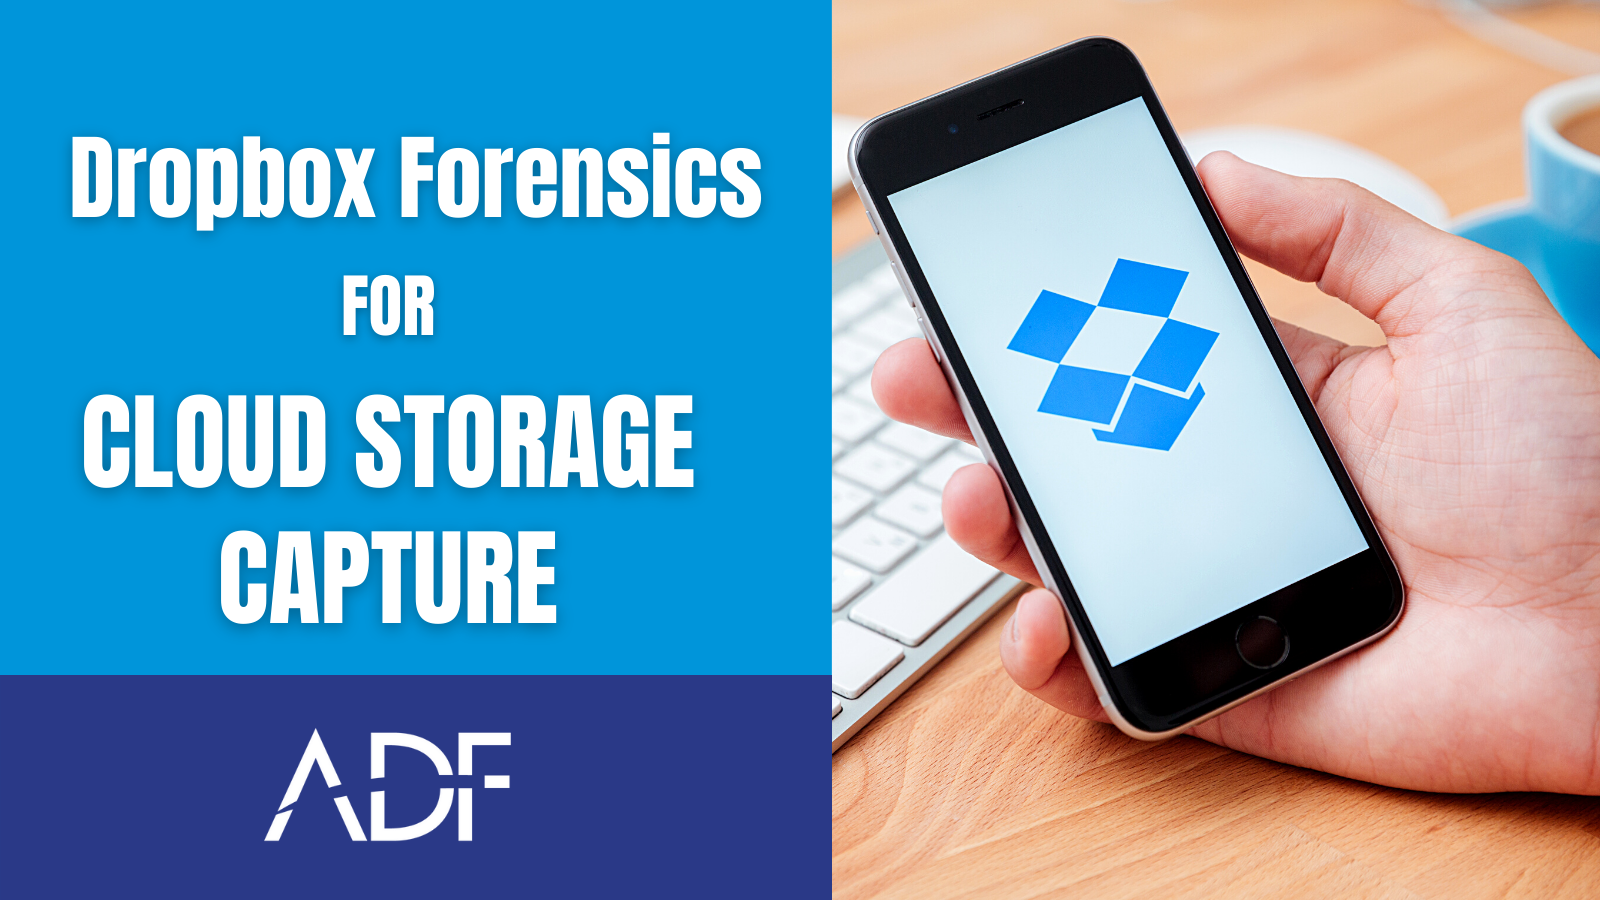 Dropbox Forensics for iOS Cloud Storage Capture (UPDATED IN 2022)